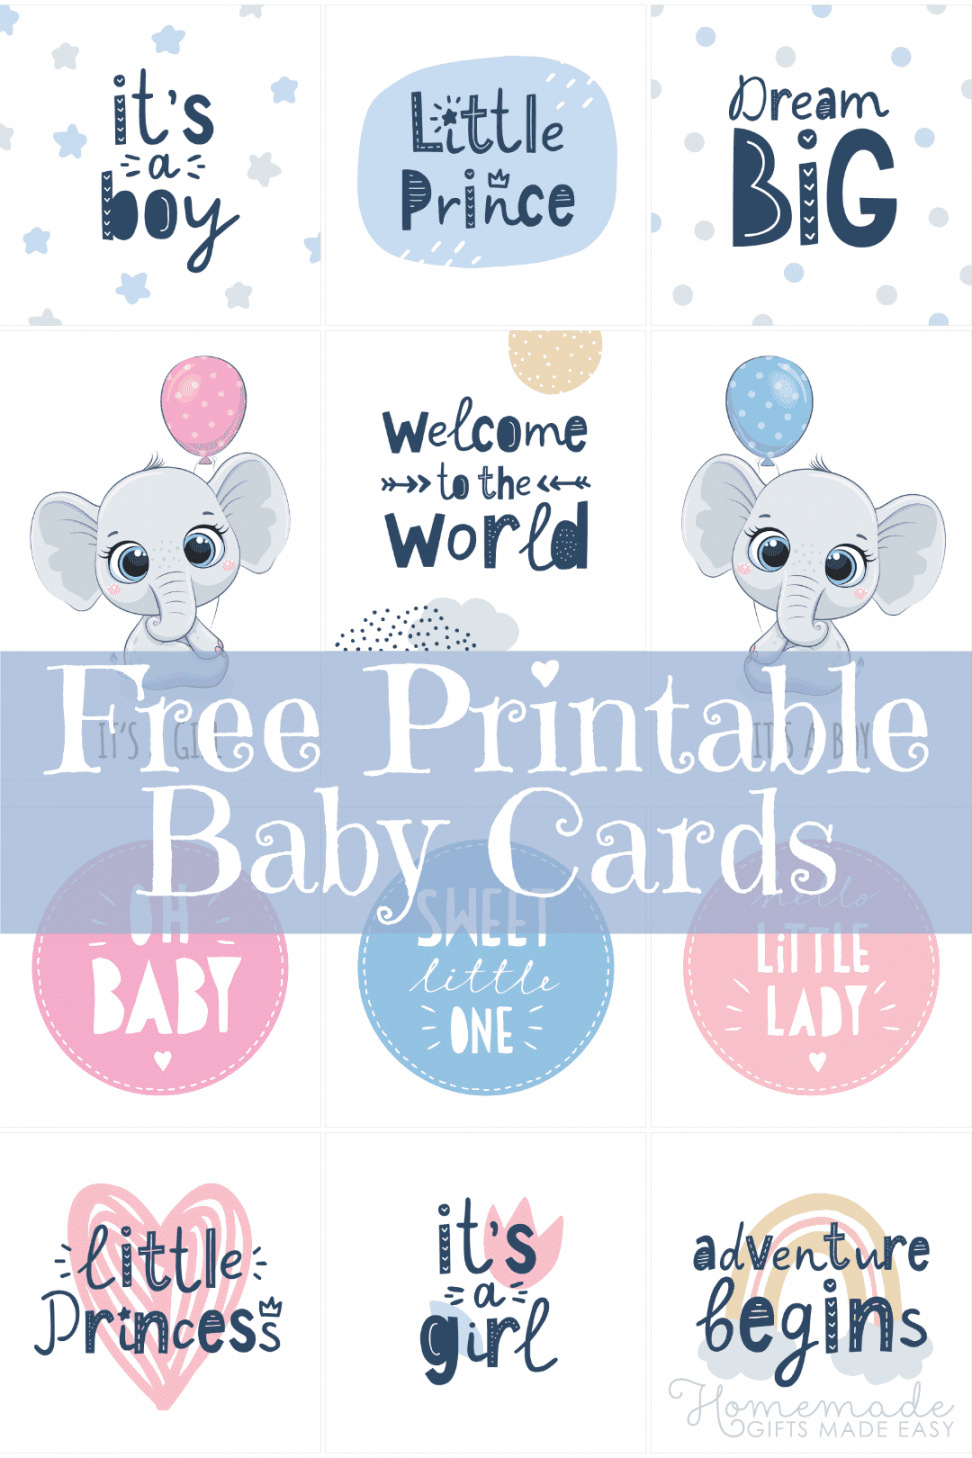 Free Printable Baby Cards - FREE Printables - Free Printable Baby Shower Cards